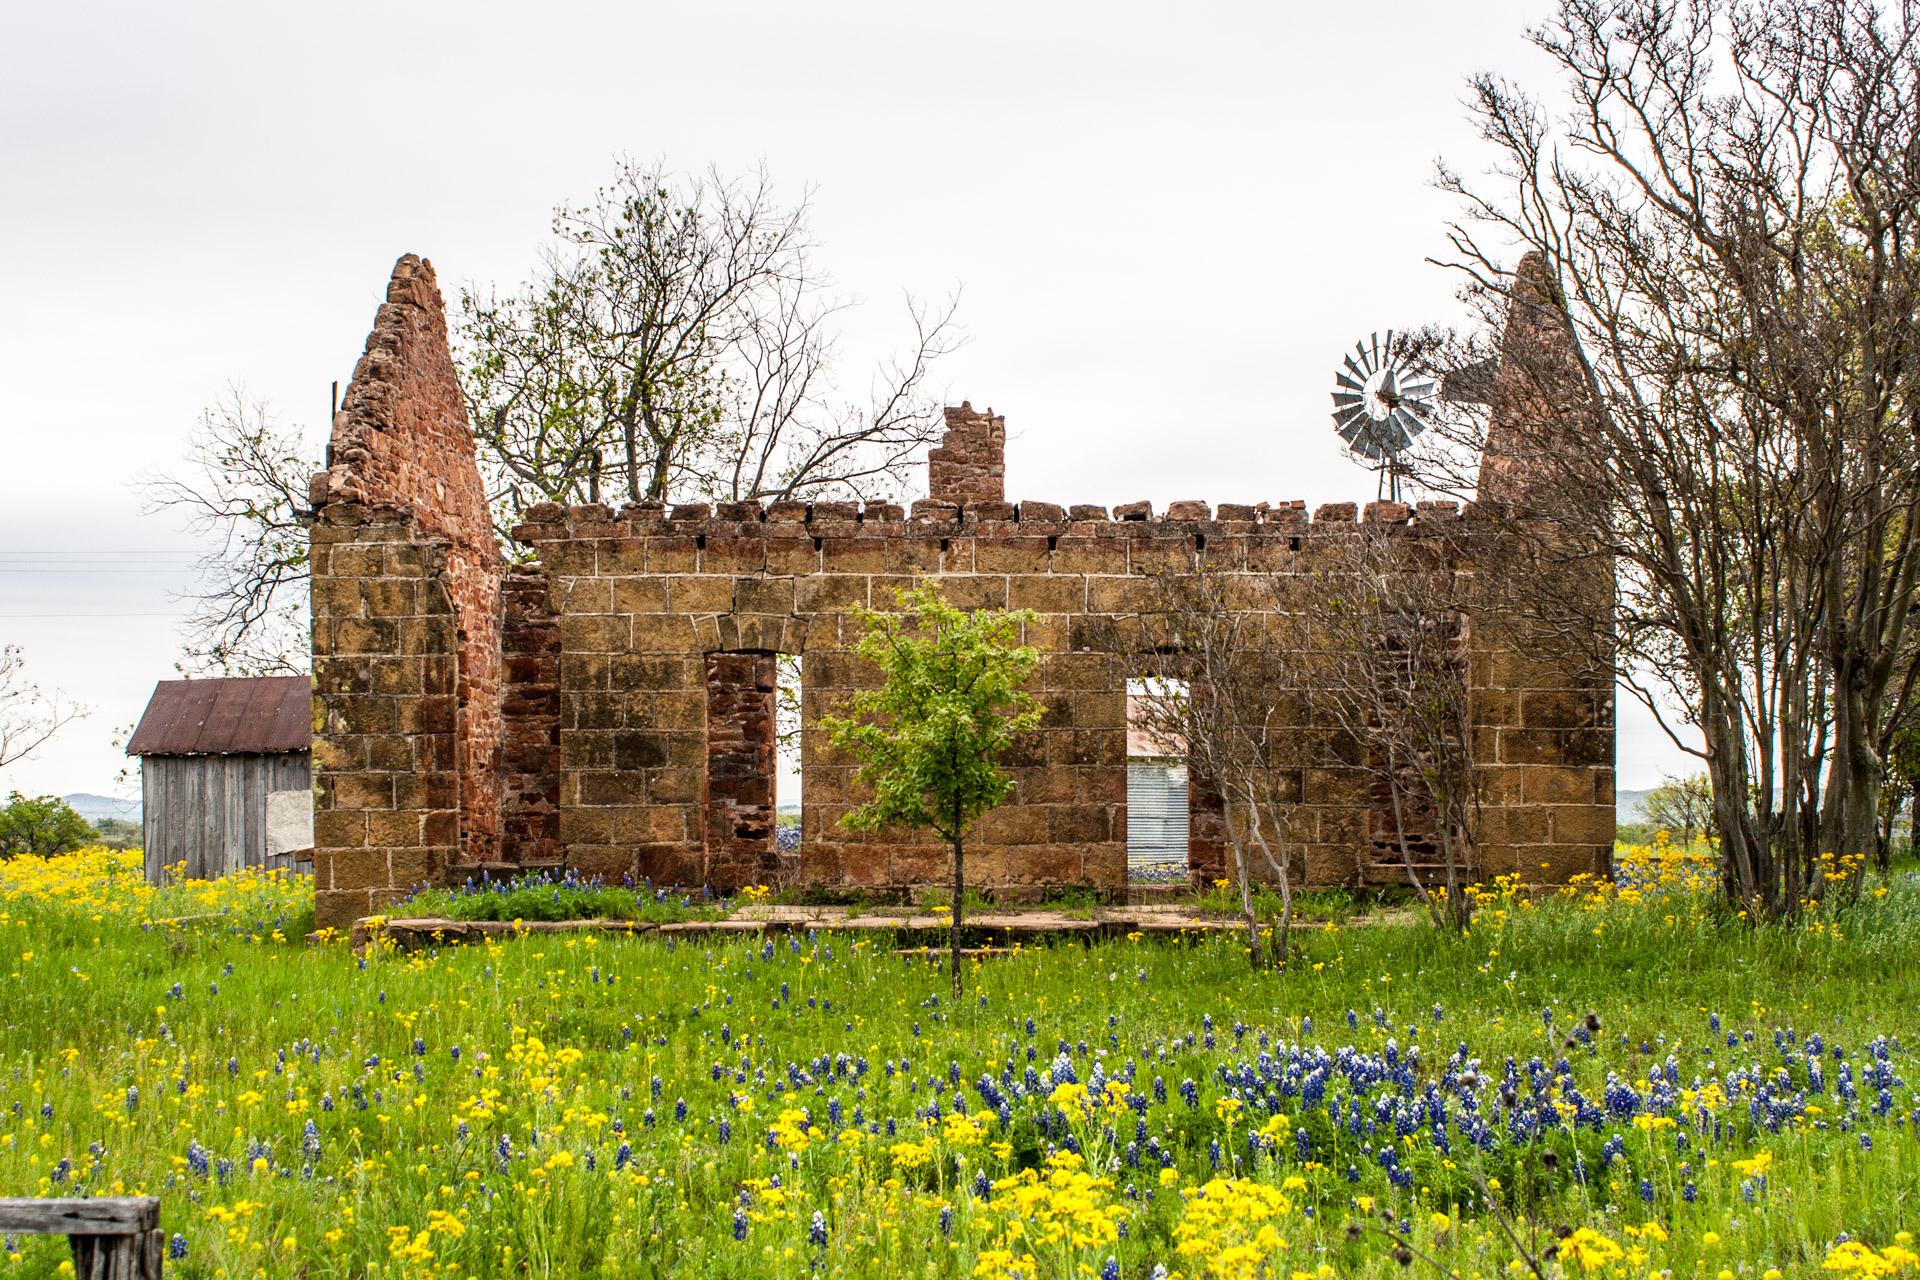 Pontotoc, Texas - A Stone Ruin With Bluebonnets (side mid)